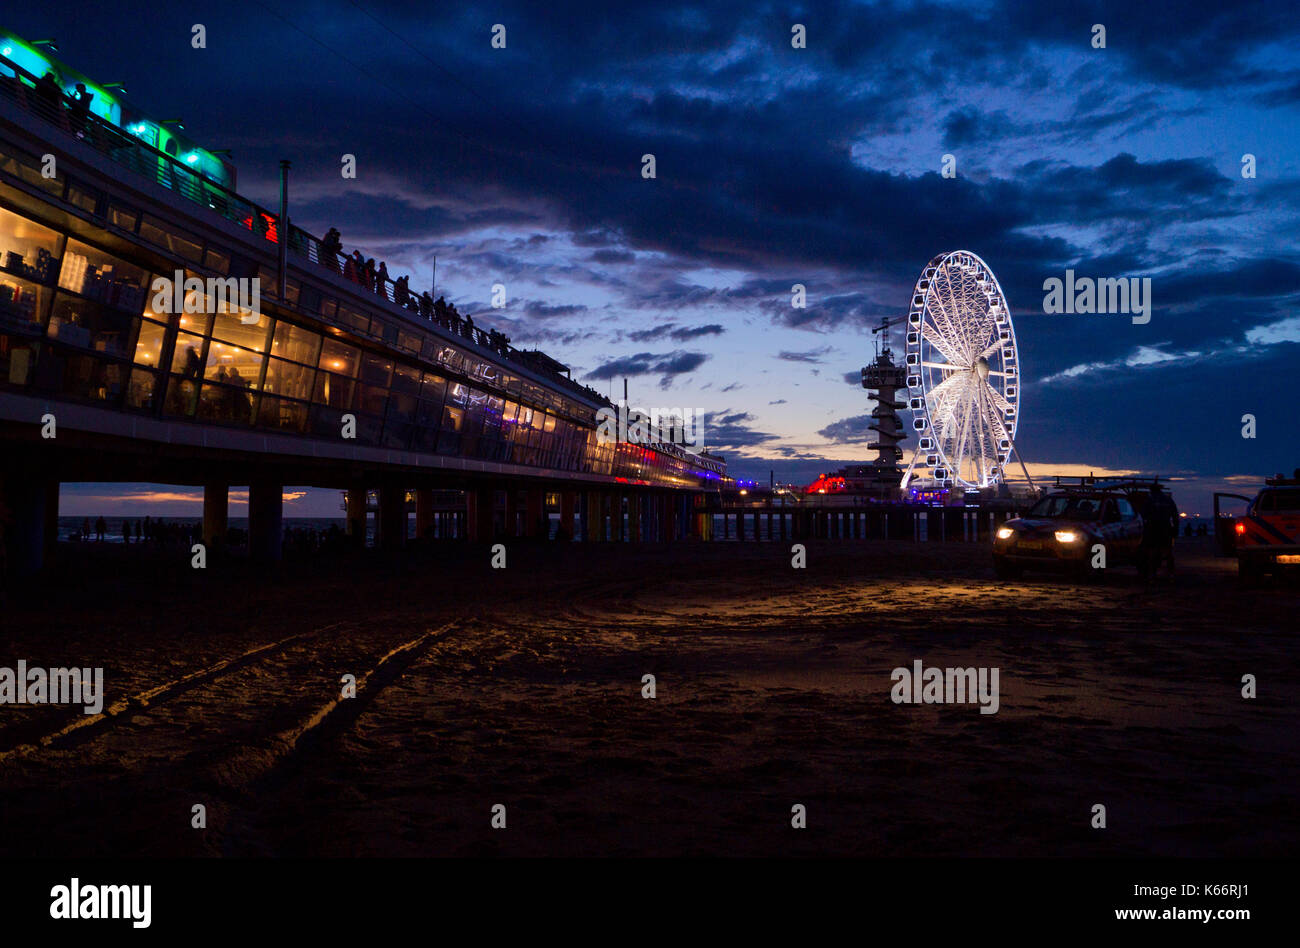 The pier at the beach of Scheveningen, The Netherlands at night with the ferris wheel lit with lights in the background at dusk/sundown Stock Photo